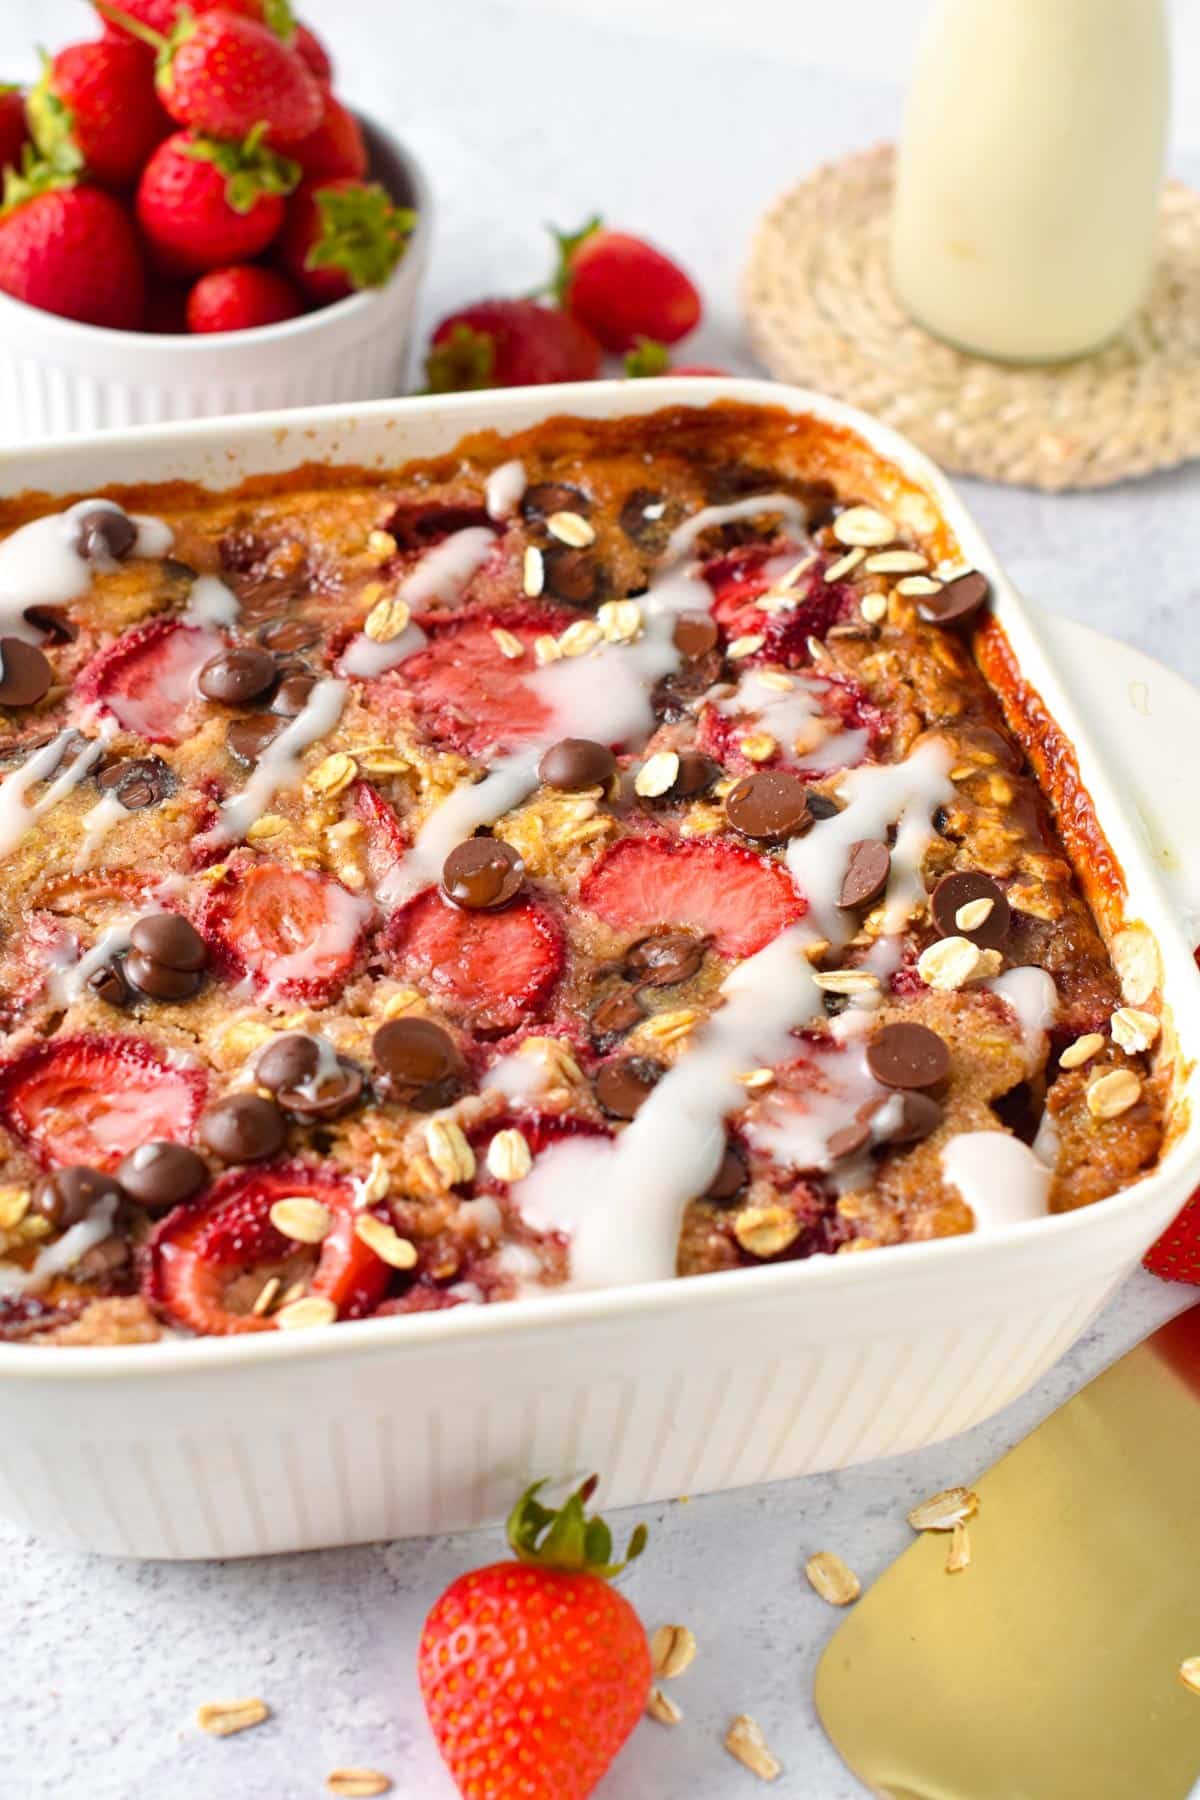 This Strawberry Baked Oatmeal is an easy, healthy one-pan breakfast to meal prep a week of tasty breakfast. You will love the combination of strawberry and chocolate in this creamy oatmeal bake.This Strawberry Baked Oatmeal is an easy, healthy one-pan breakfast to meal prep a week of tasty breakfast. You will love the combination of strawberry and chocolate in this creamy oatmeal bake.